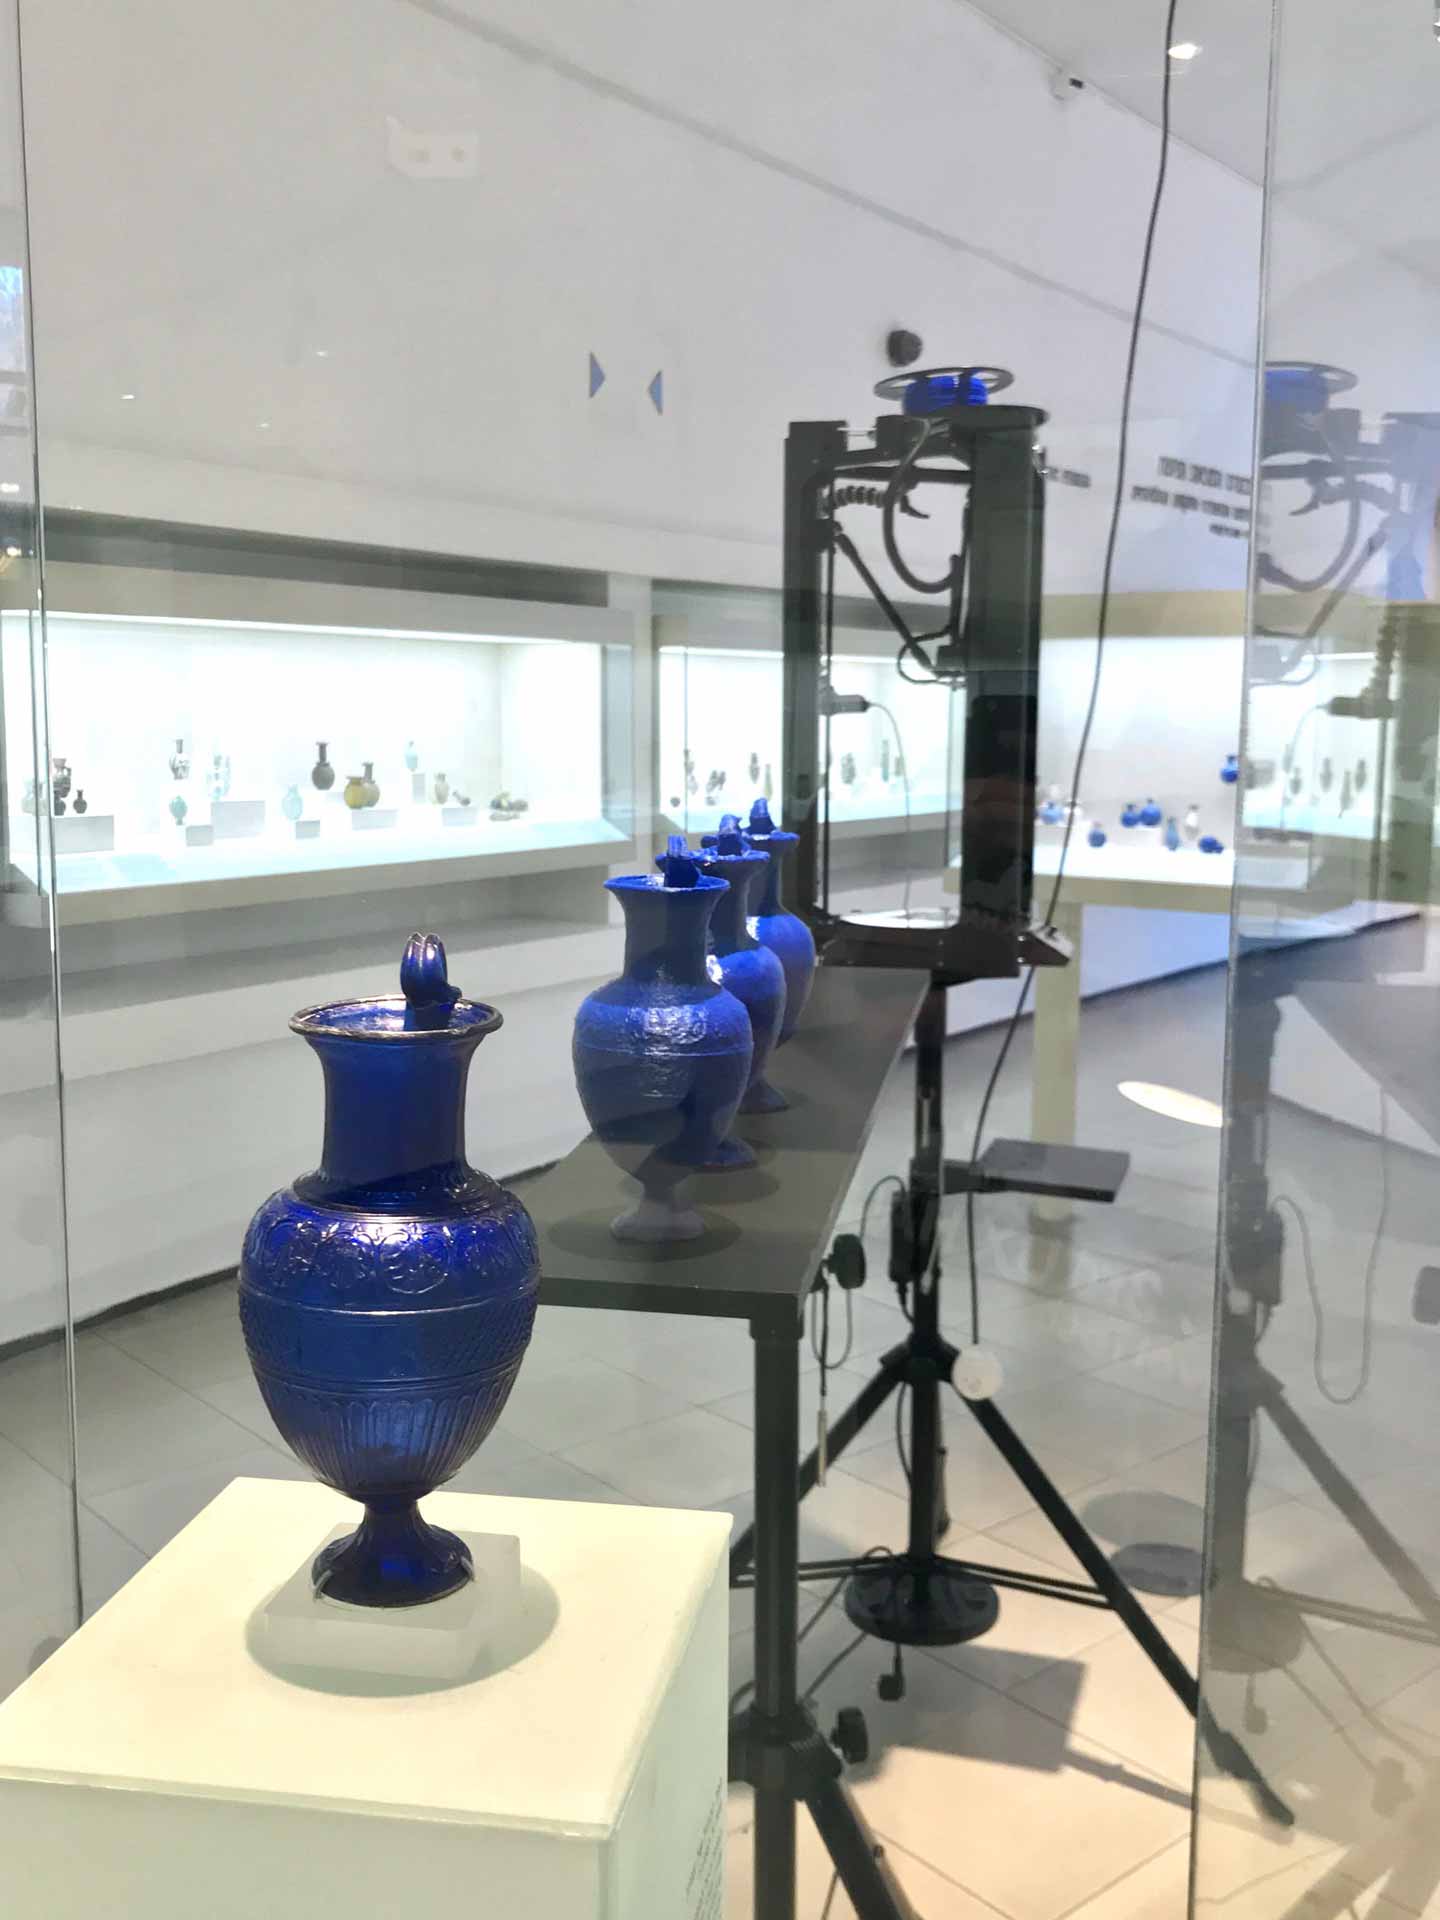 A museum display showing the original blue jug in a vitrine, beside which there are four 3D-printed jug replicas and a 3D printer.